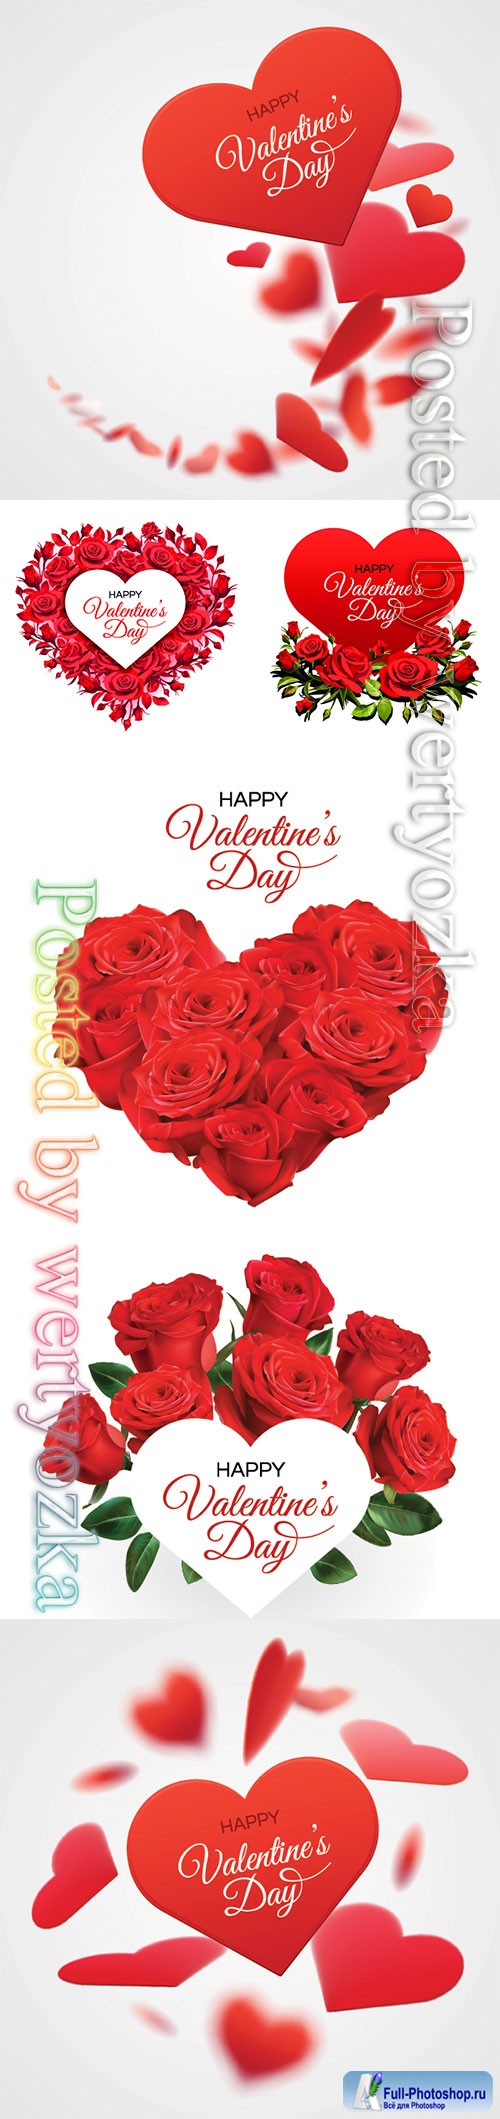 Valentine's Day greeting card template, red roses